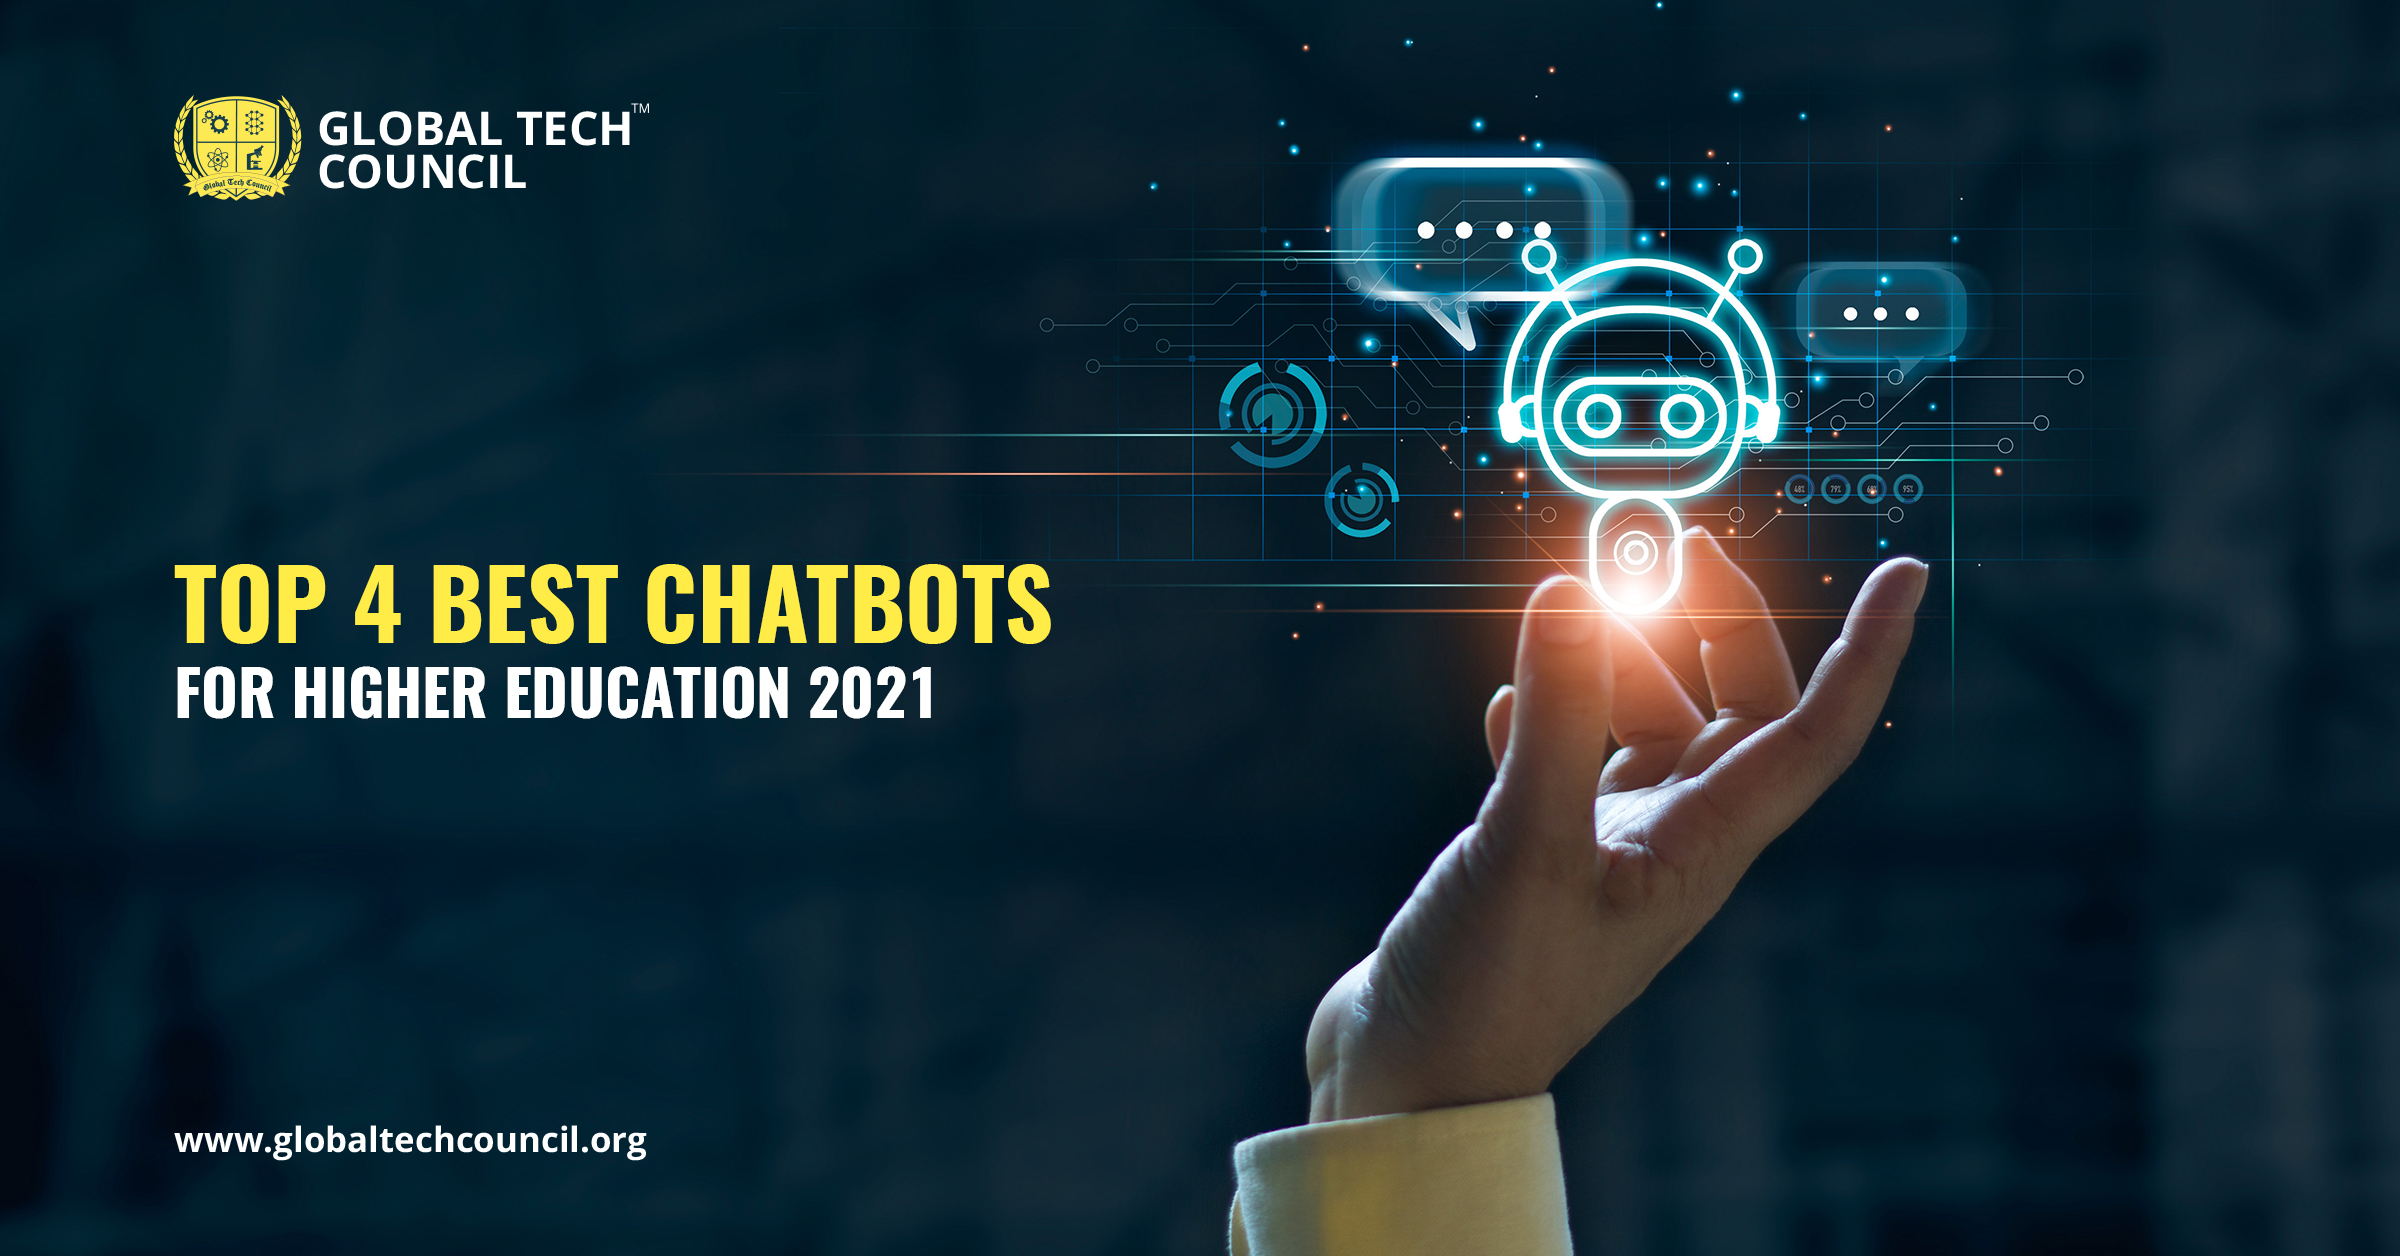 Top 4 Best Chatbots for Higher Education 2021